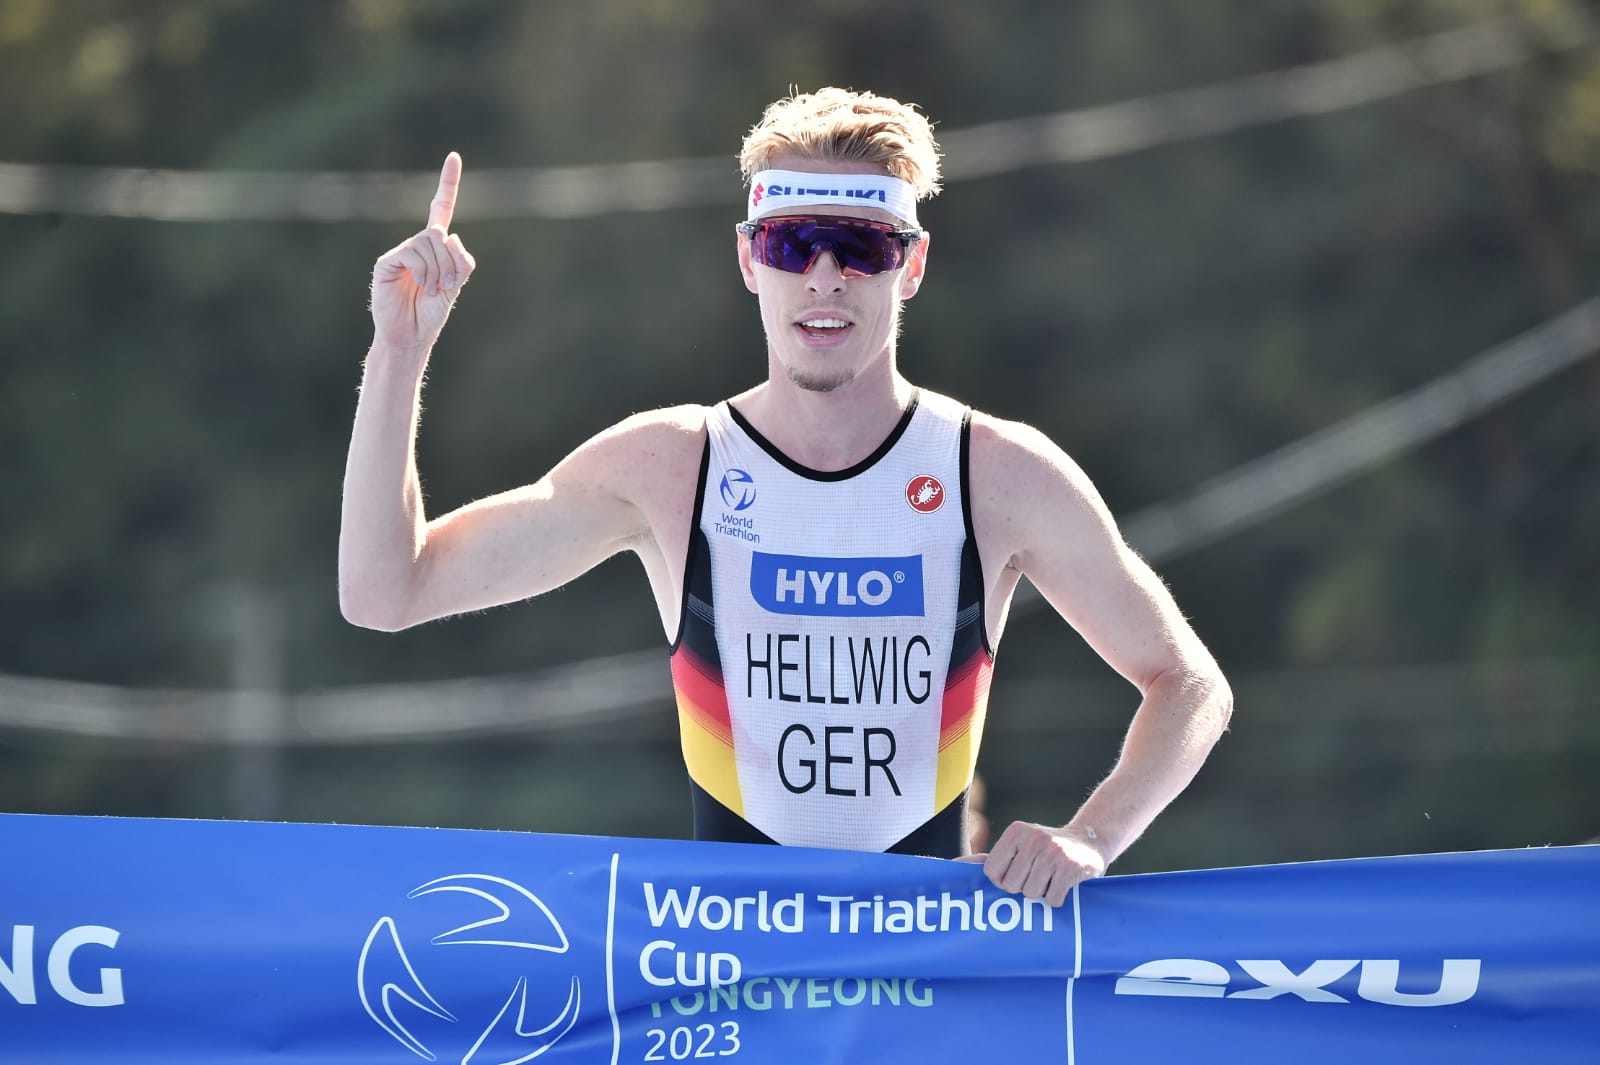 Tim Hellwig proves unbeatable on World Cup tour with gold in Tongyeong • World Triathlon